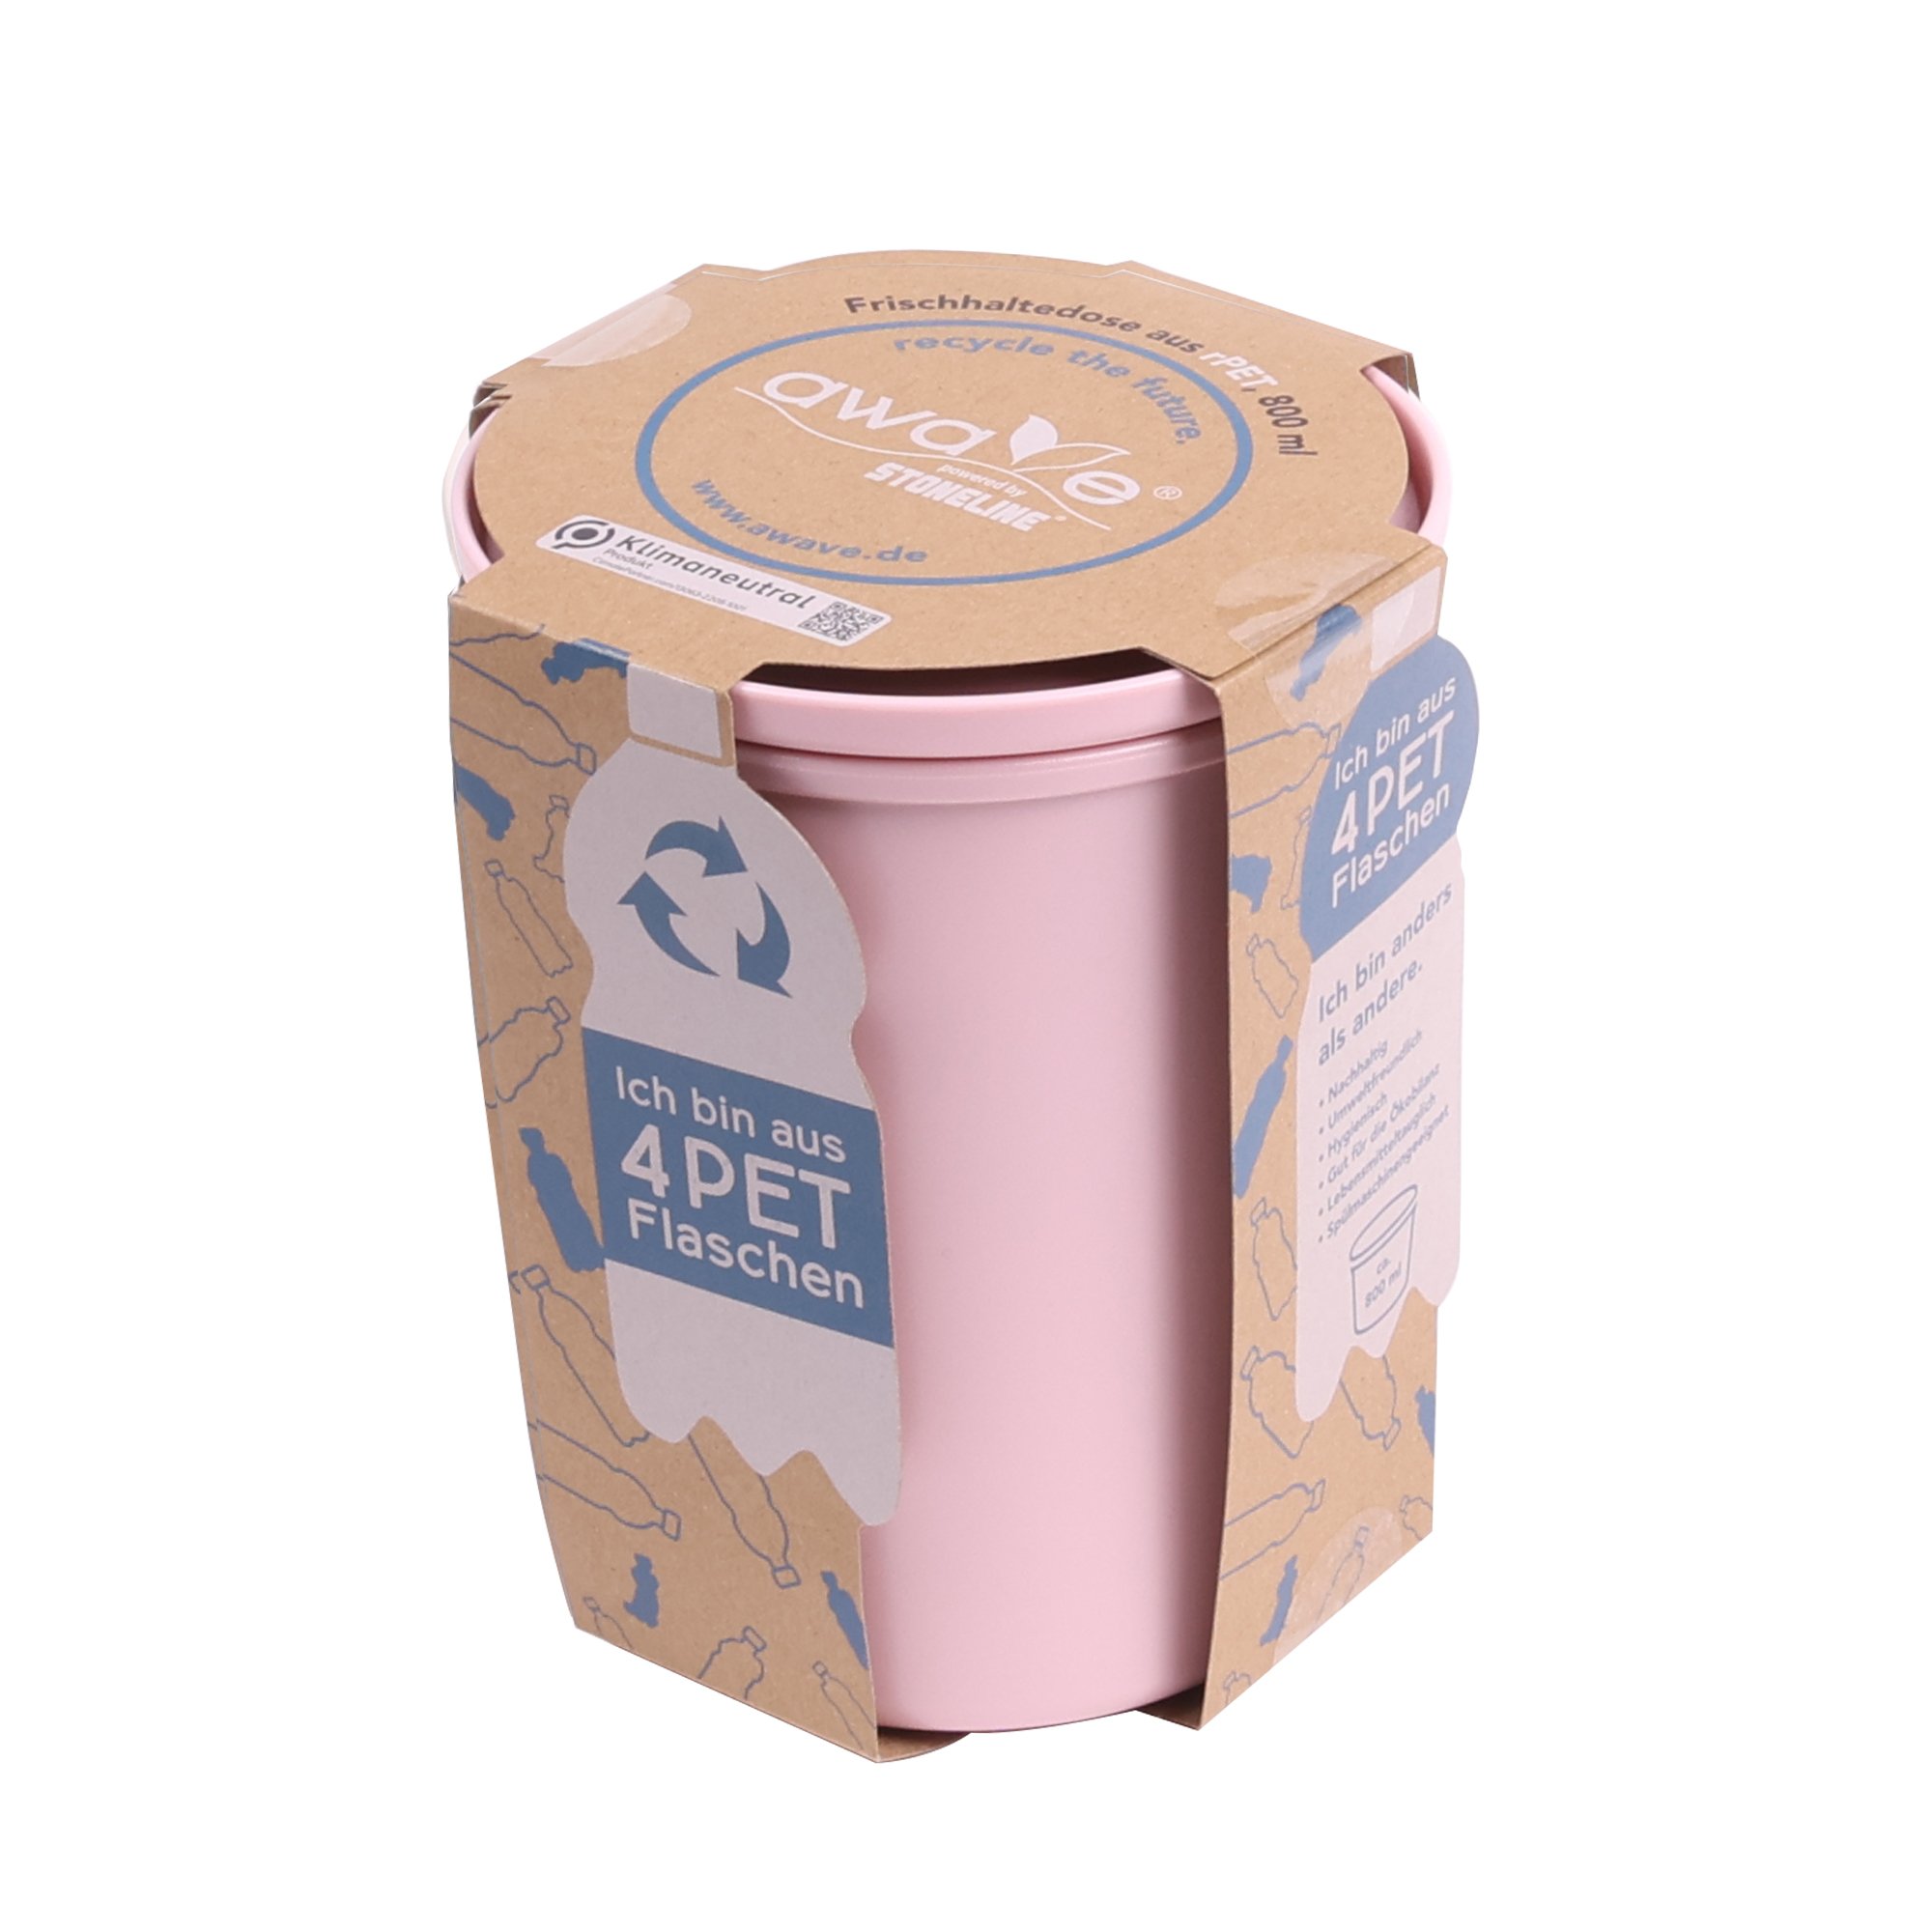 AWAVE® 3pcs. food storage container set 800ml, with rPET, rose